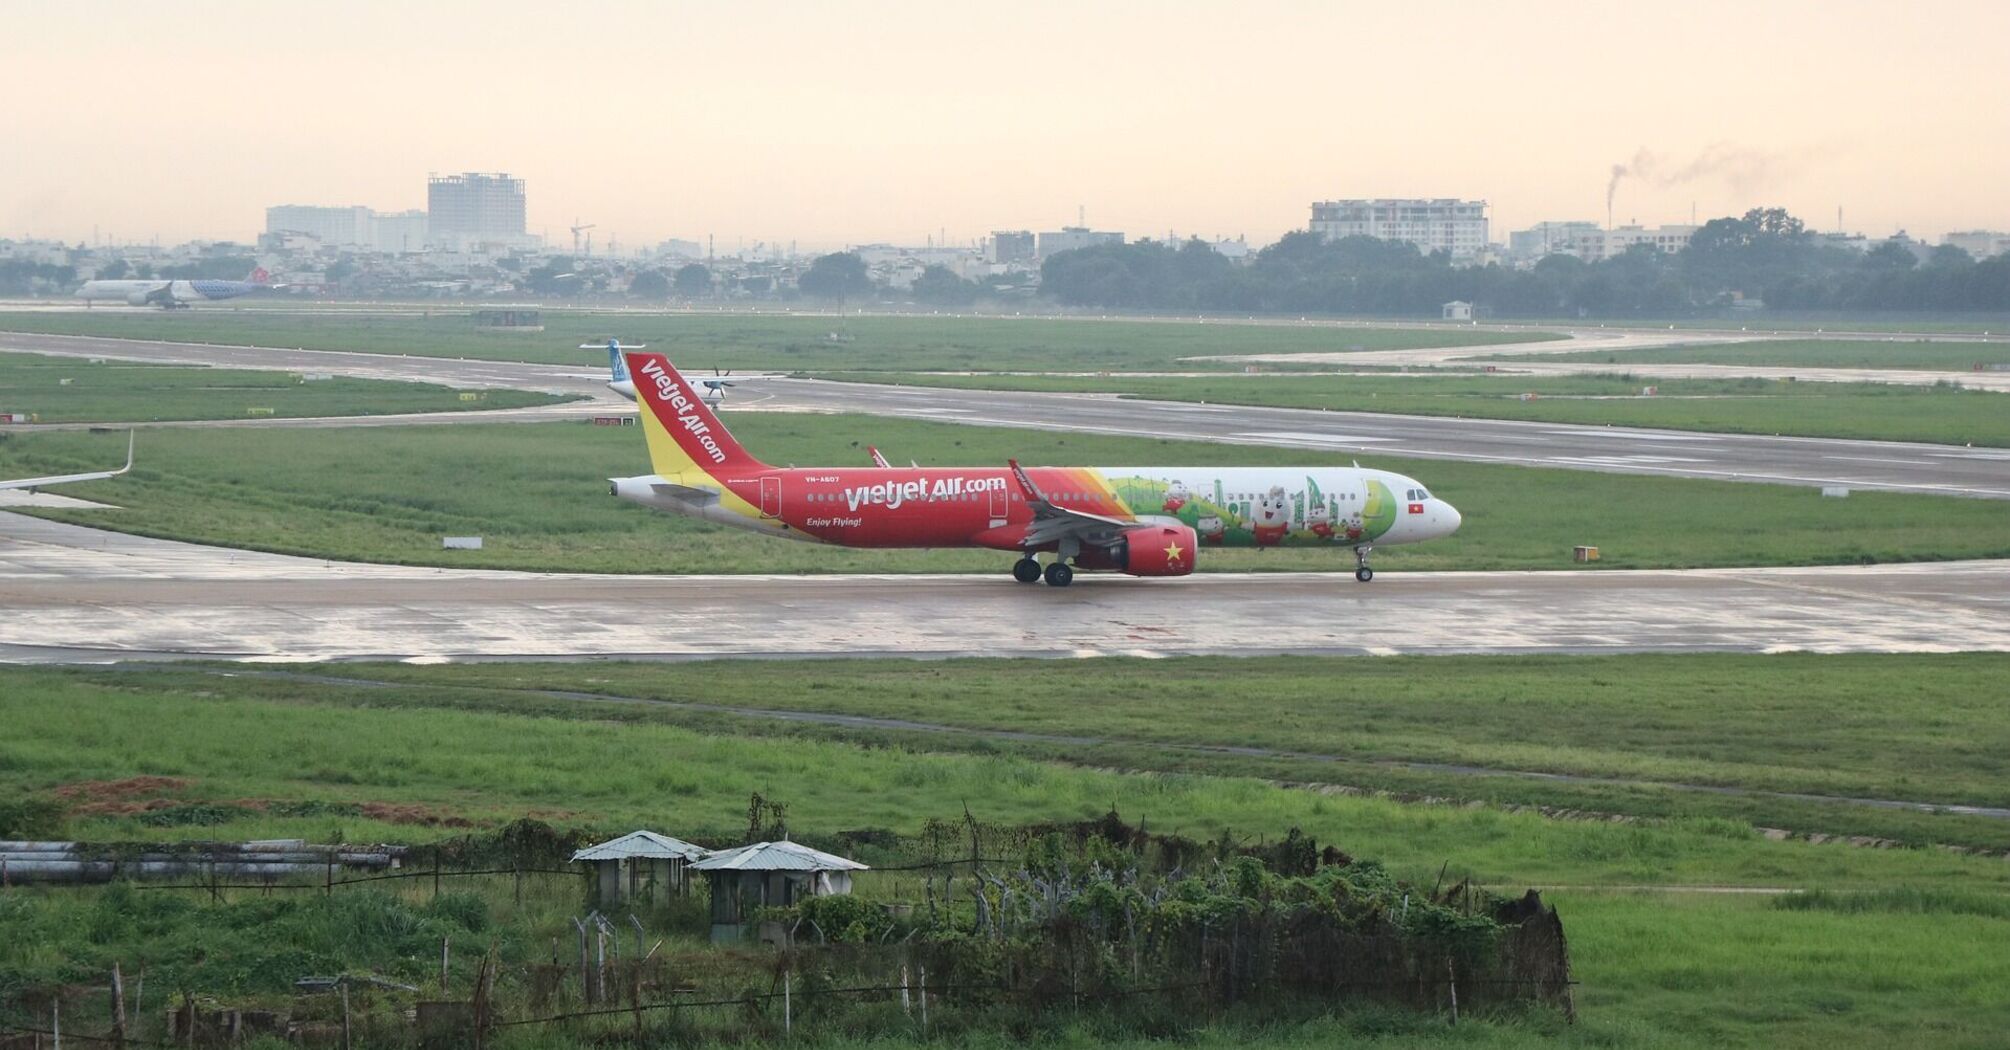 Vietjet airplane on tarmac at dusk with grassy field in foreground 